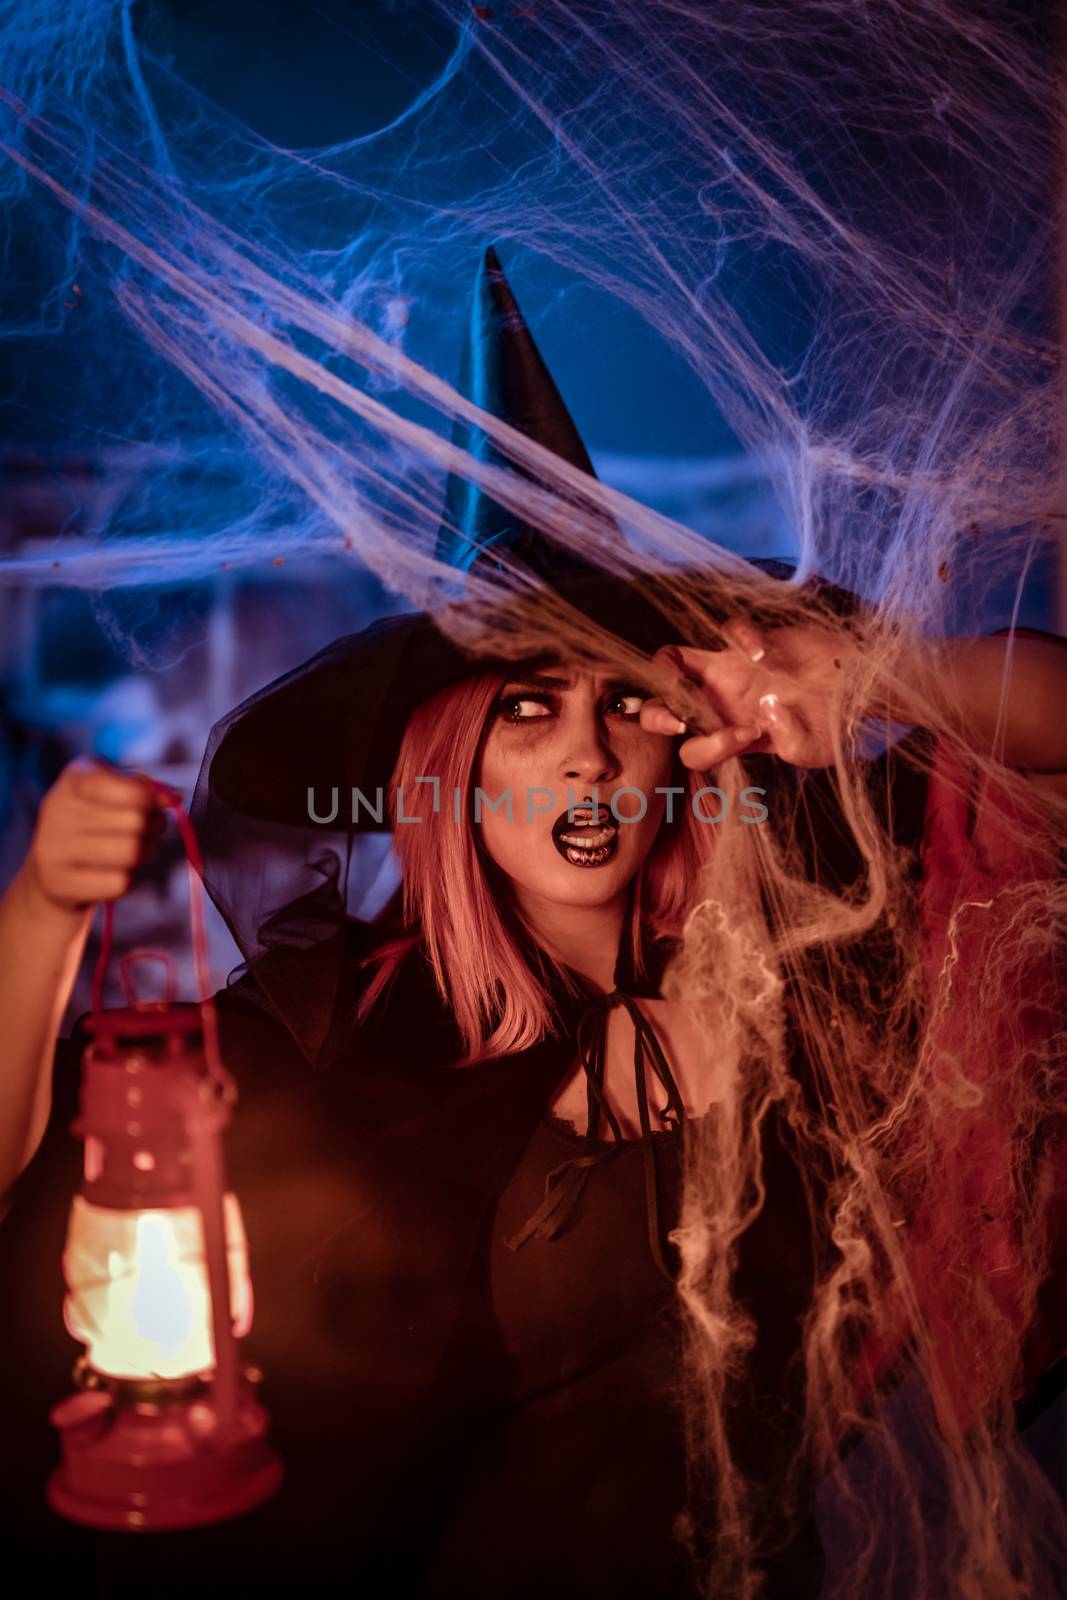 Witch with lighted lantern in her hand in creepy cobweb surroundings is looking for saomething.